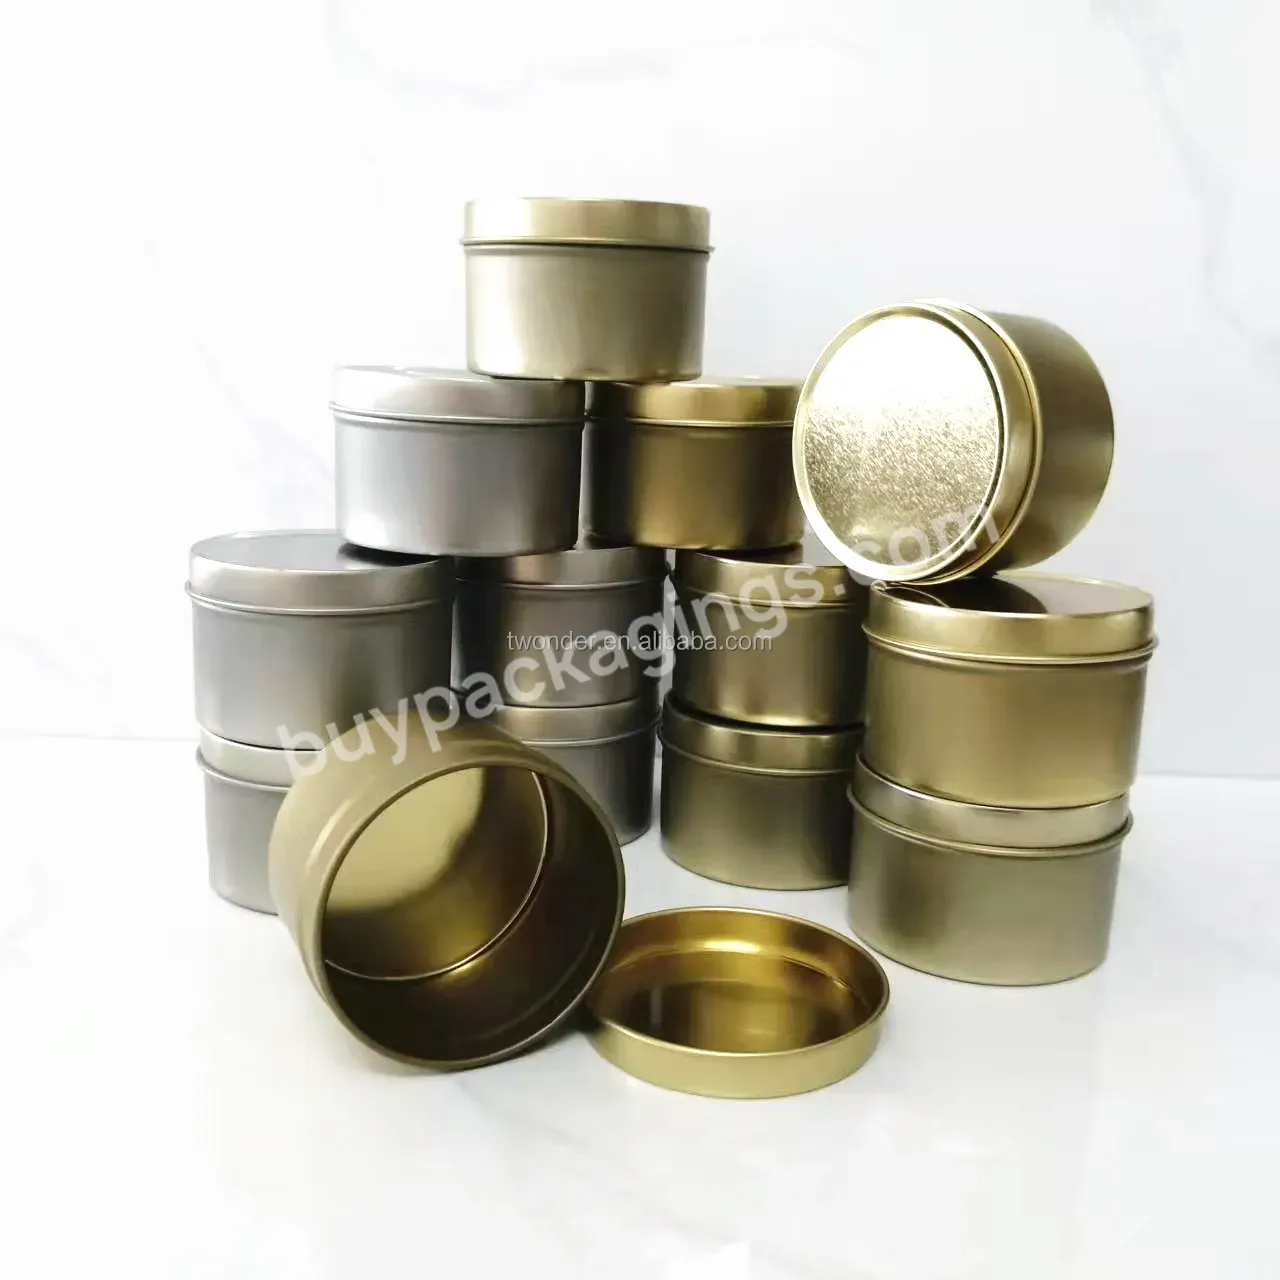 Factory Large Stock 2.5oz 3oz Candle Tins With Lids Scented Soy Wax Candle Tin For Candle Making Gift Box 60x40mm - Buy Small Candle Tins Birthday Tins,Small Tins With Lids,Empty Candle Tins.